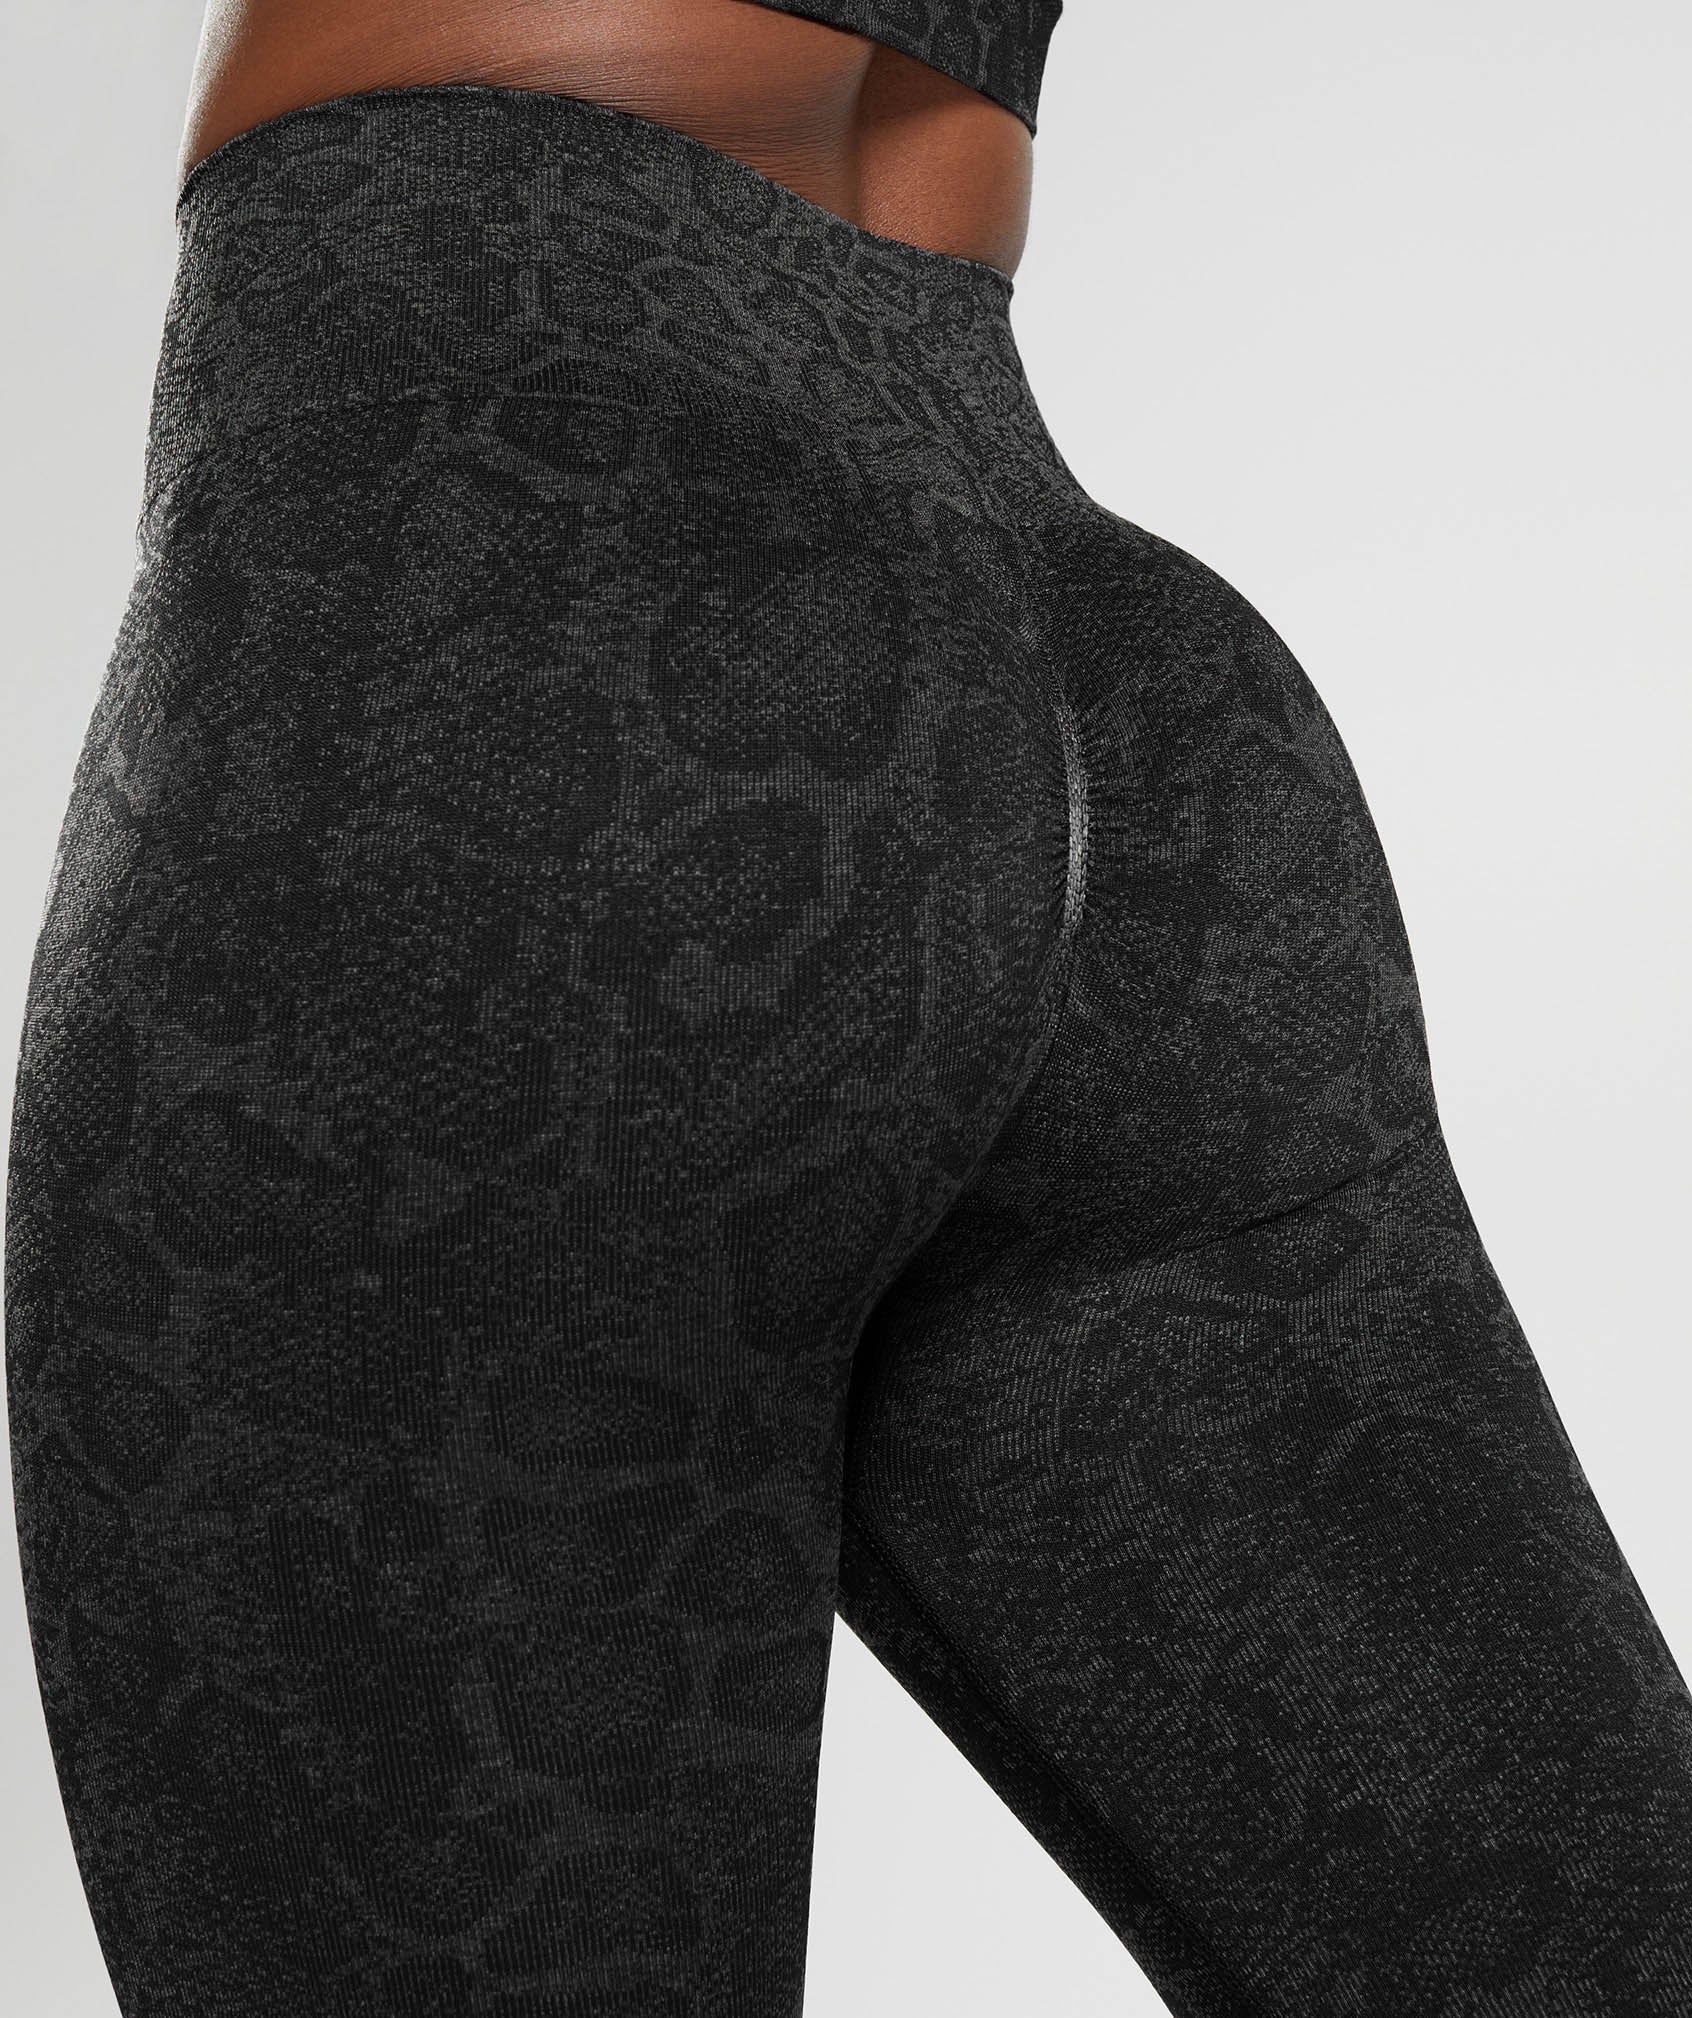 LEGGINGS With an Abstract Alligator Pattern Unisex Black-gray-beige -   Canada